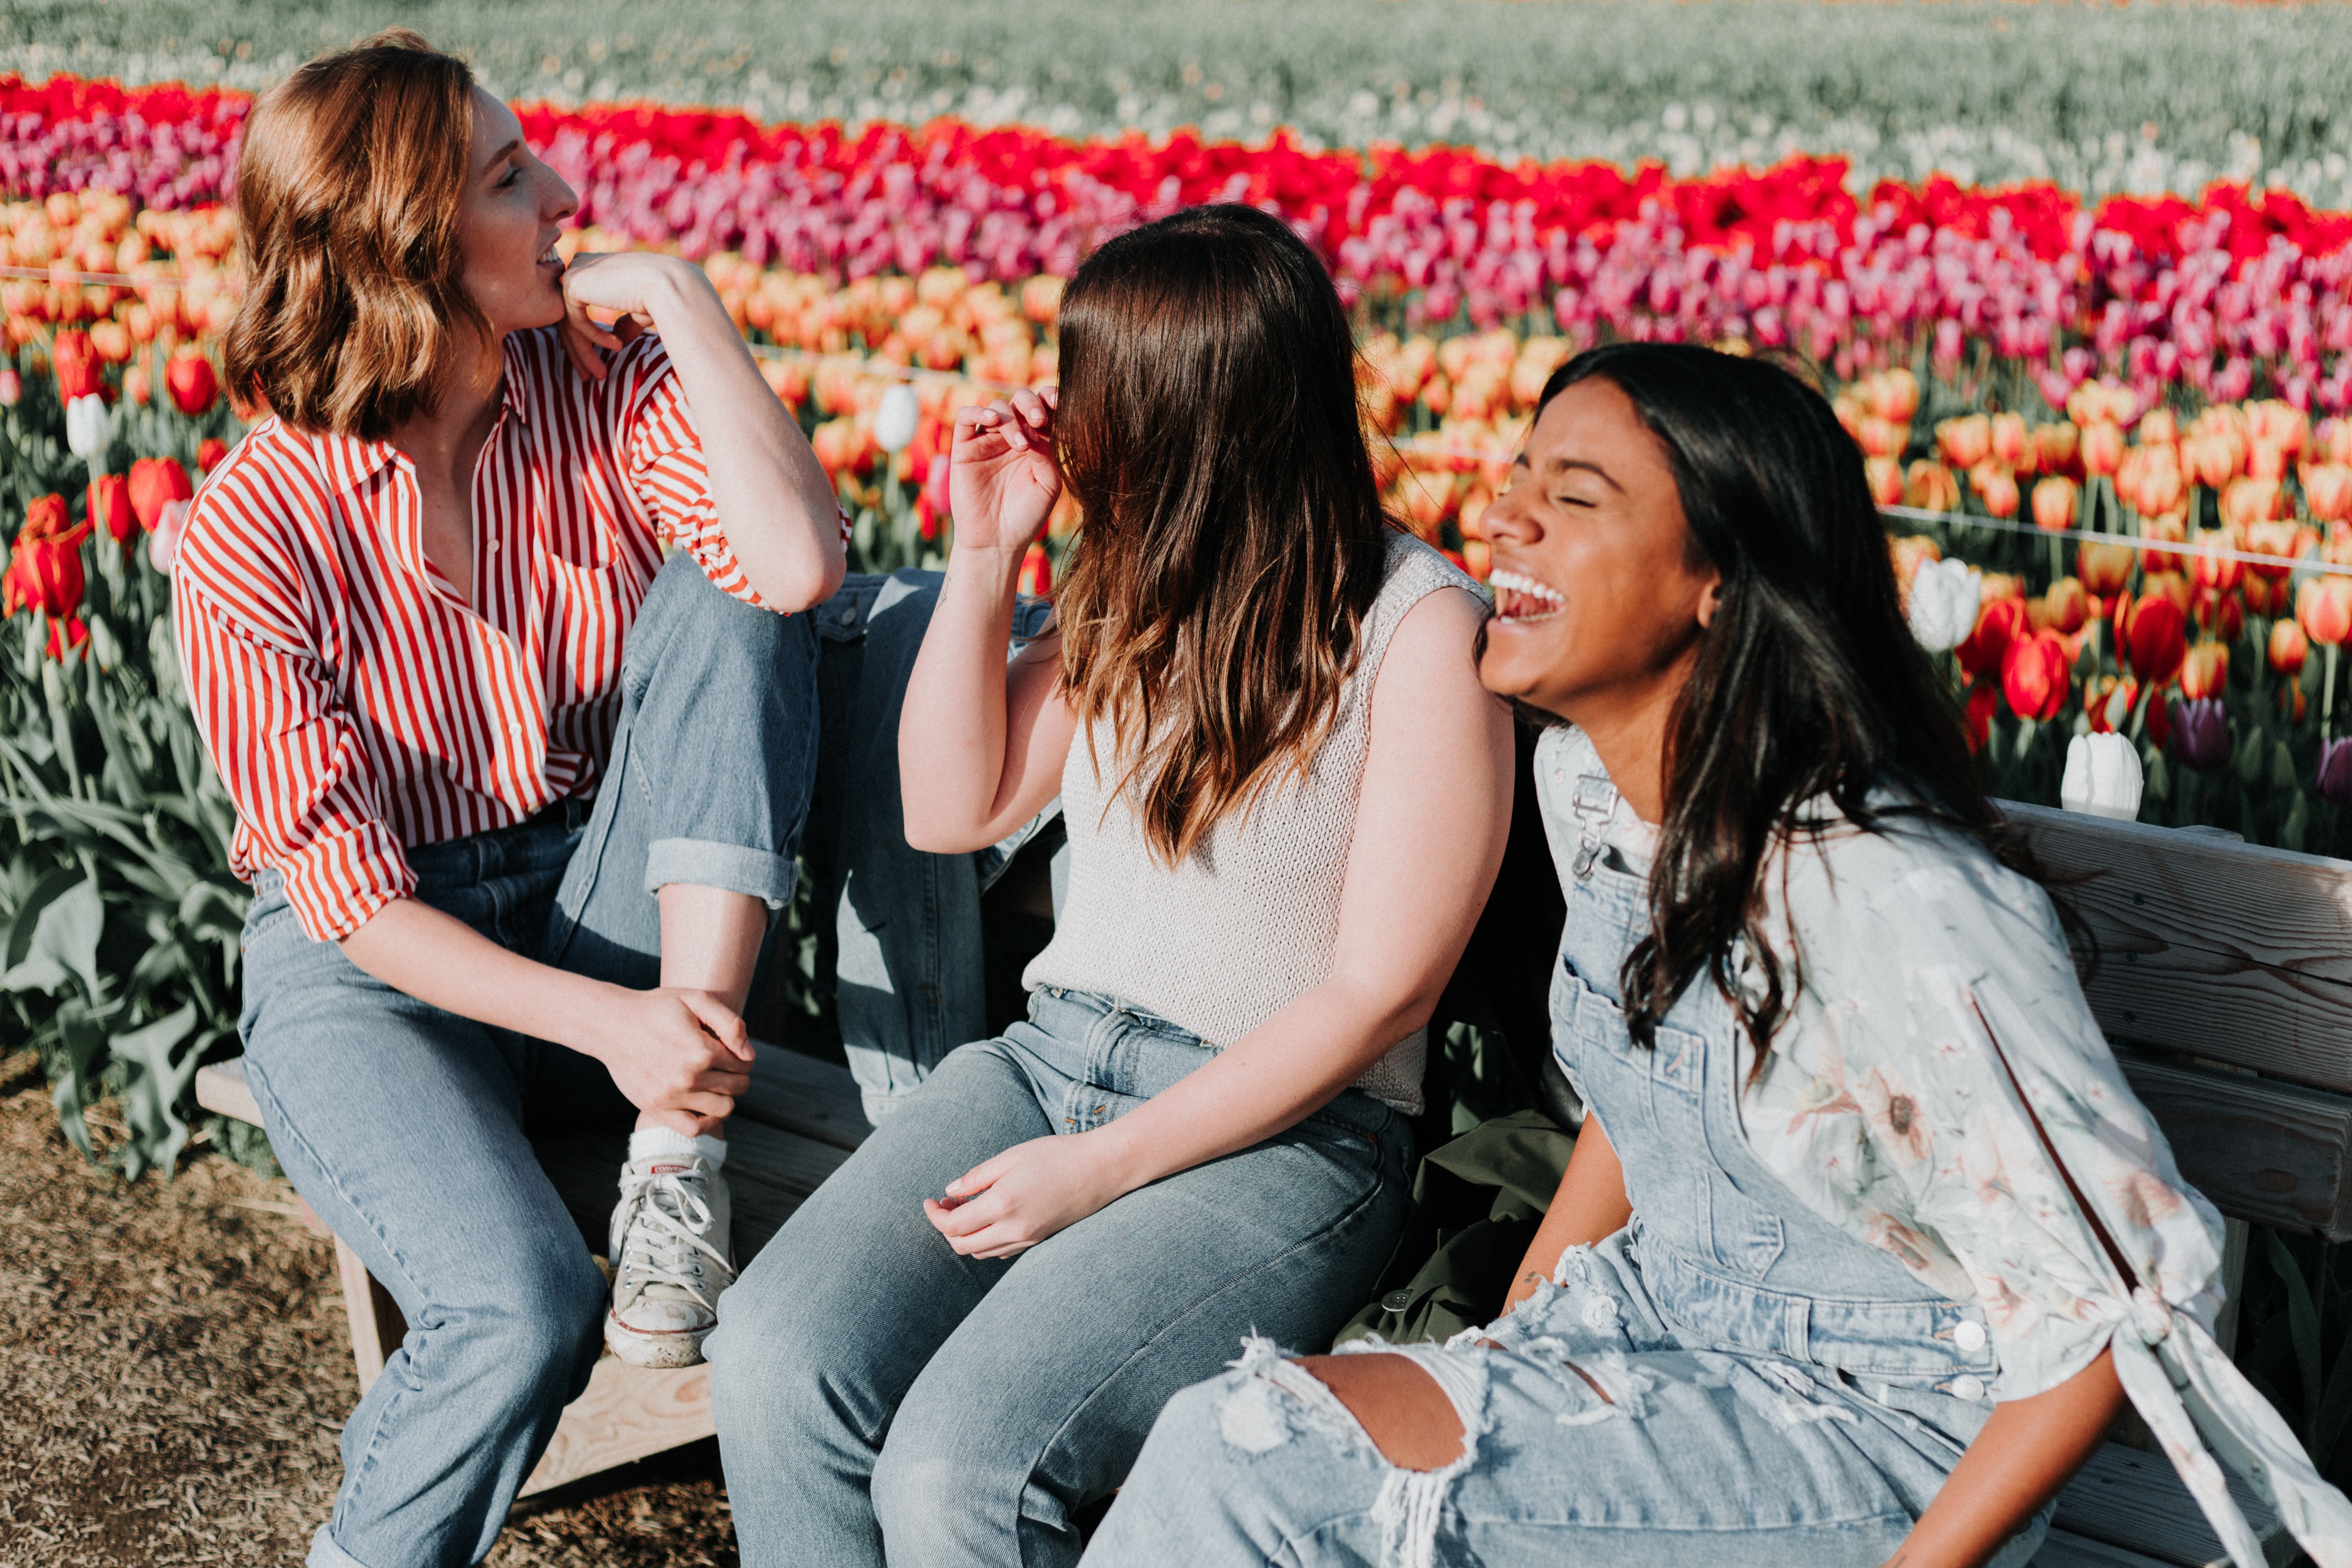 Group of women friends sitting on a bench laughing in front of a red tulip field.